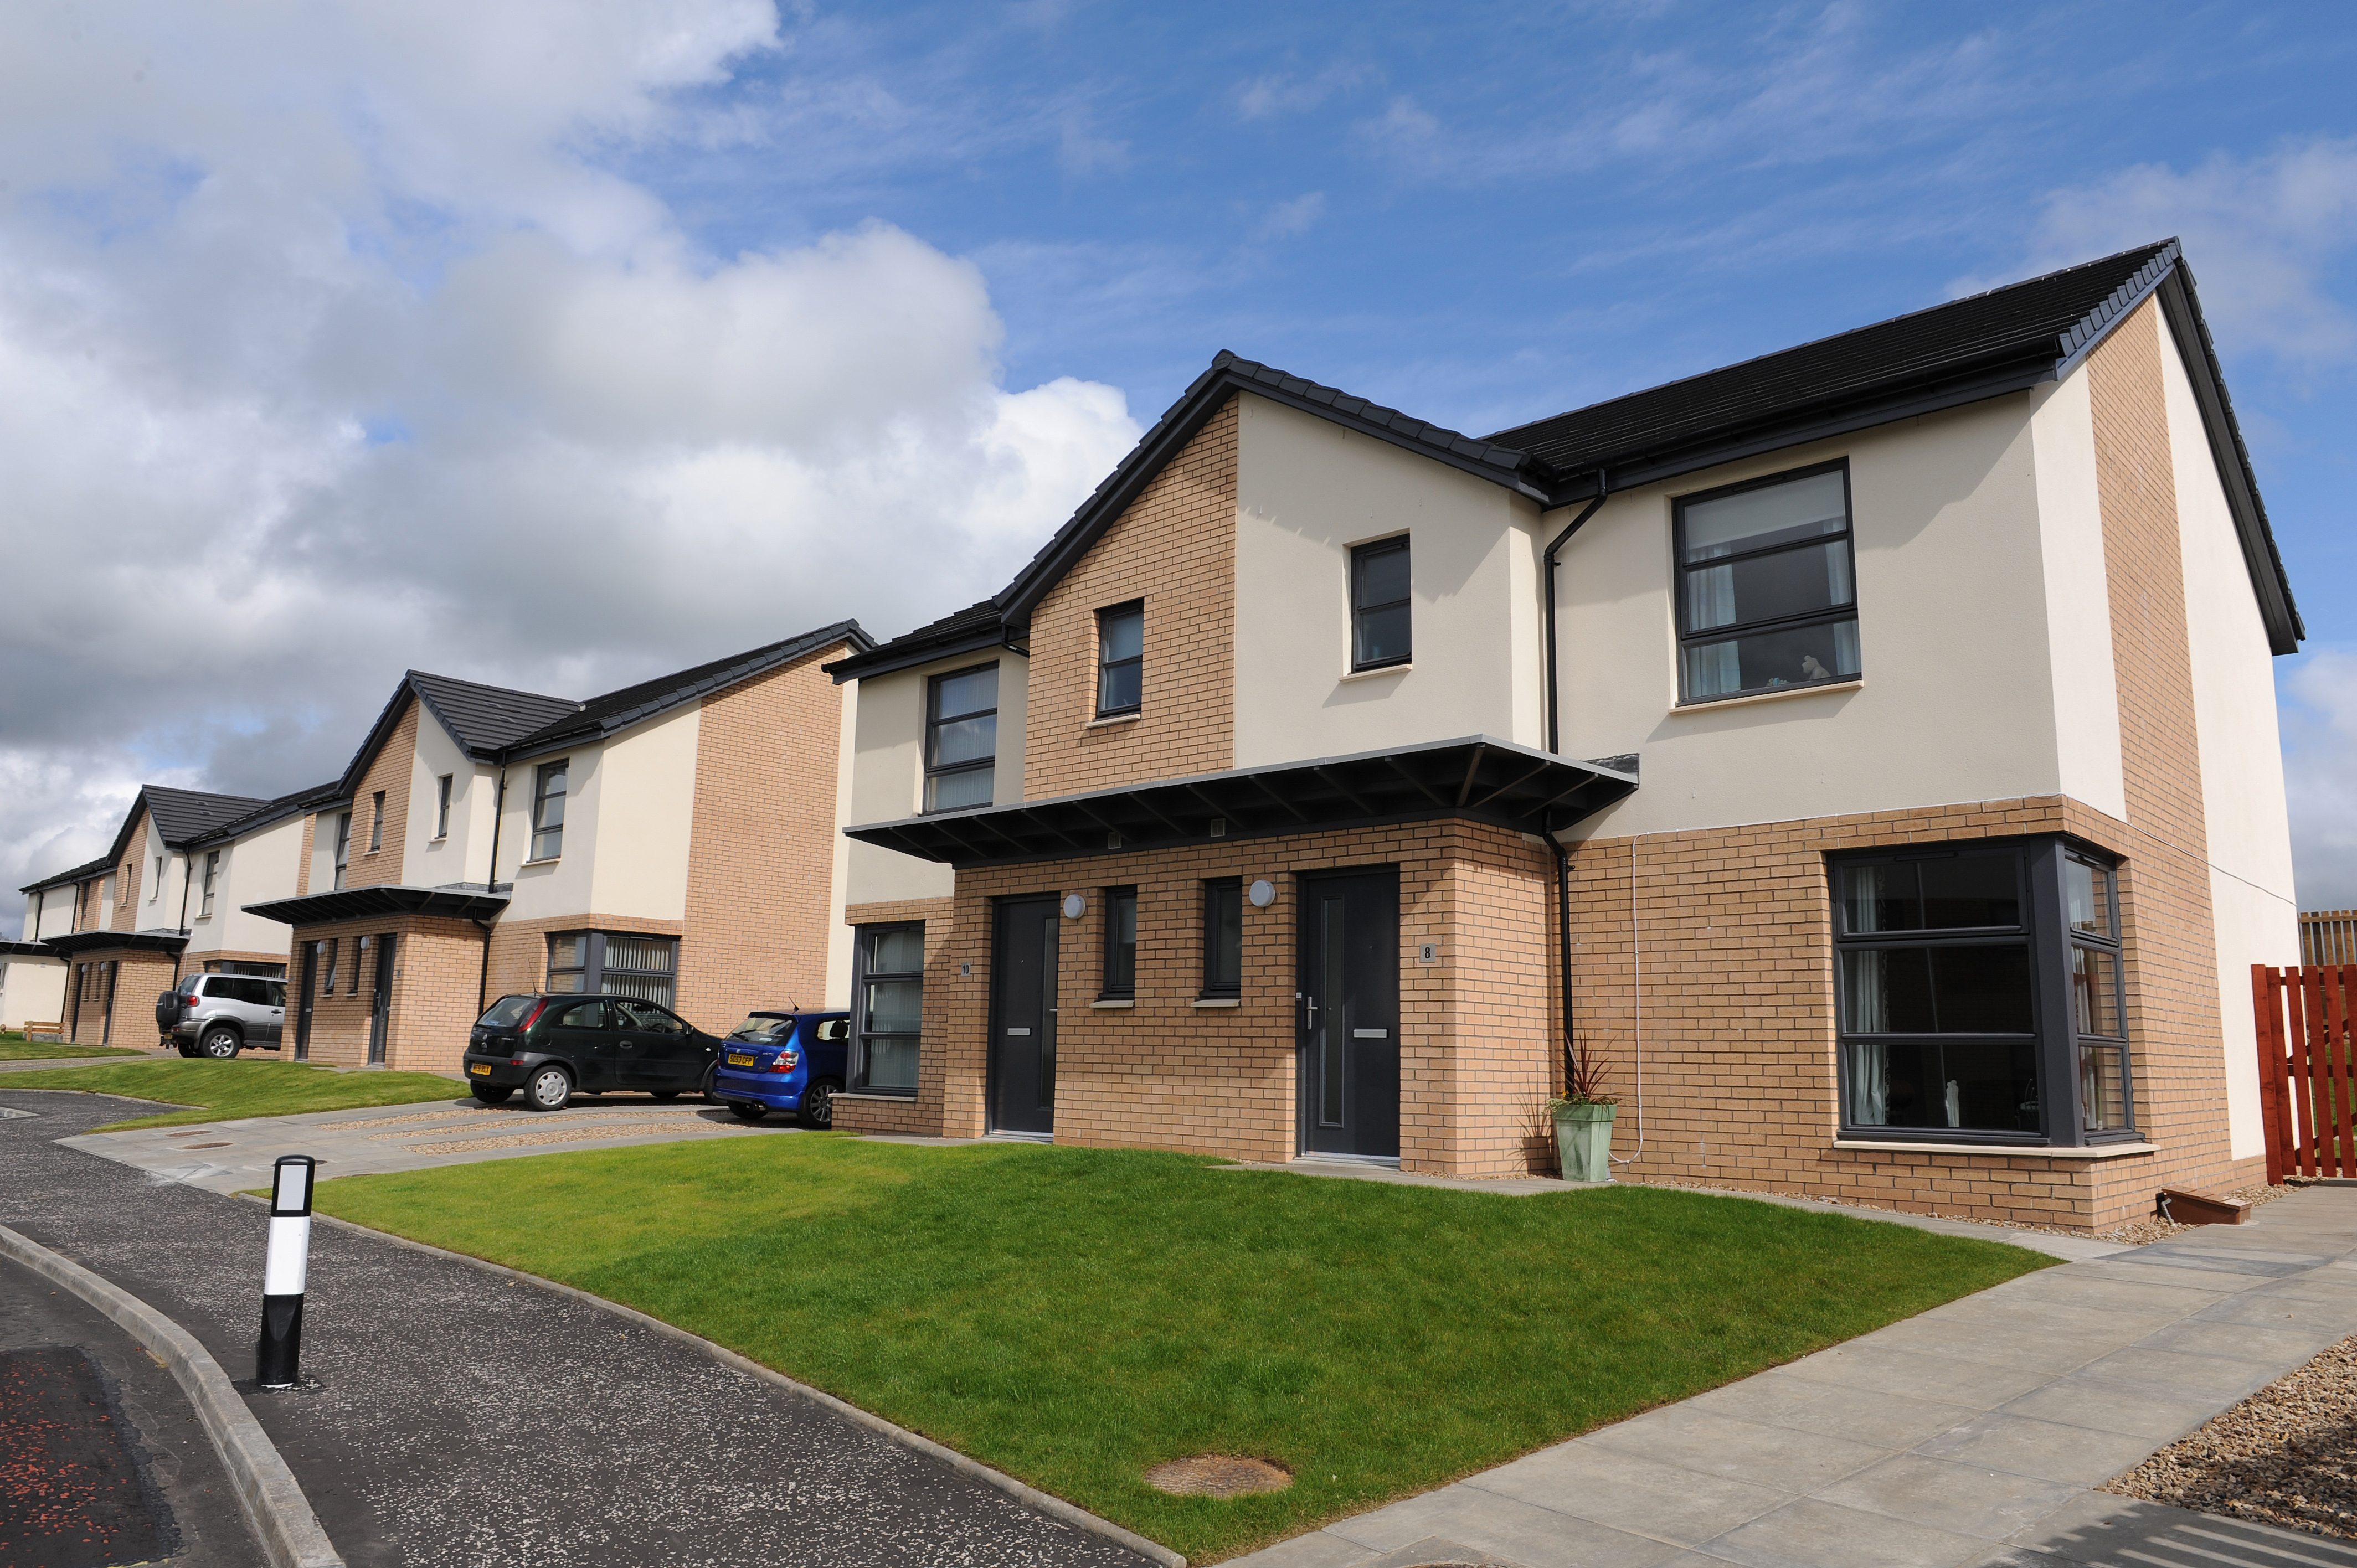 East Ayrshire housing association receives £10.5m to enhance facilities